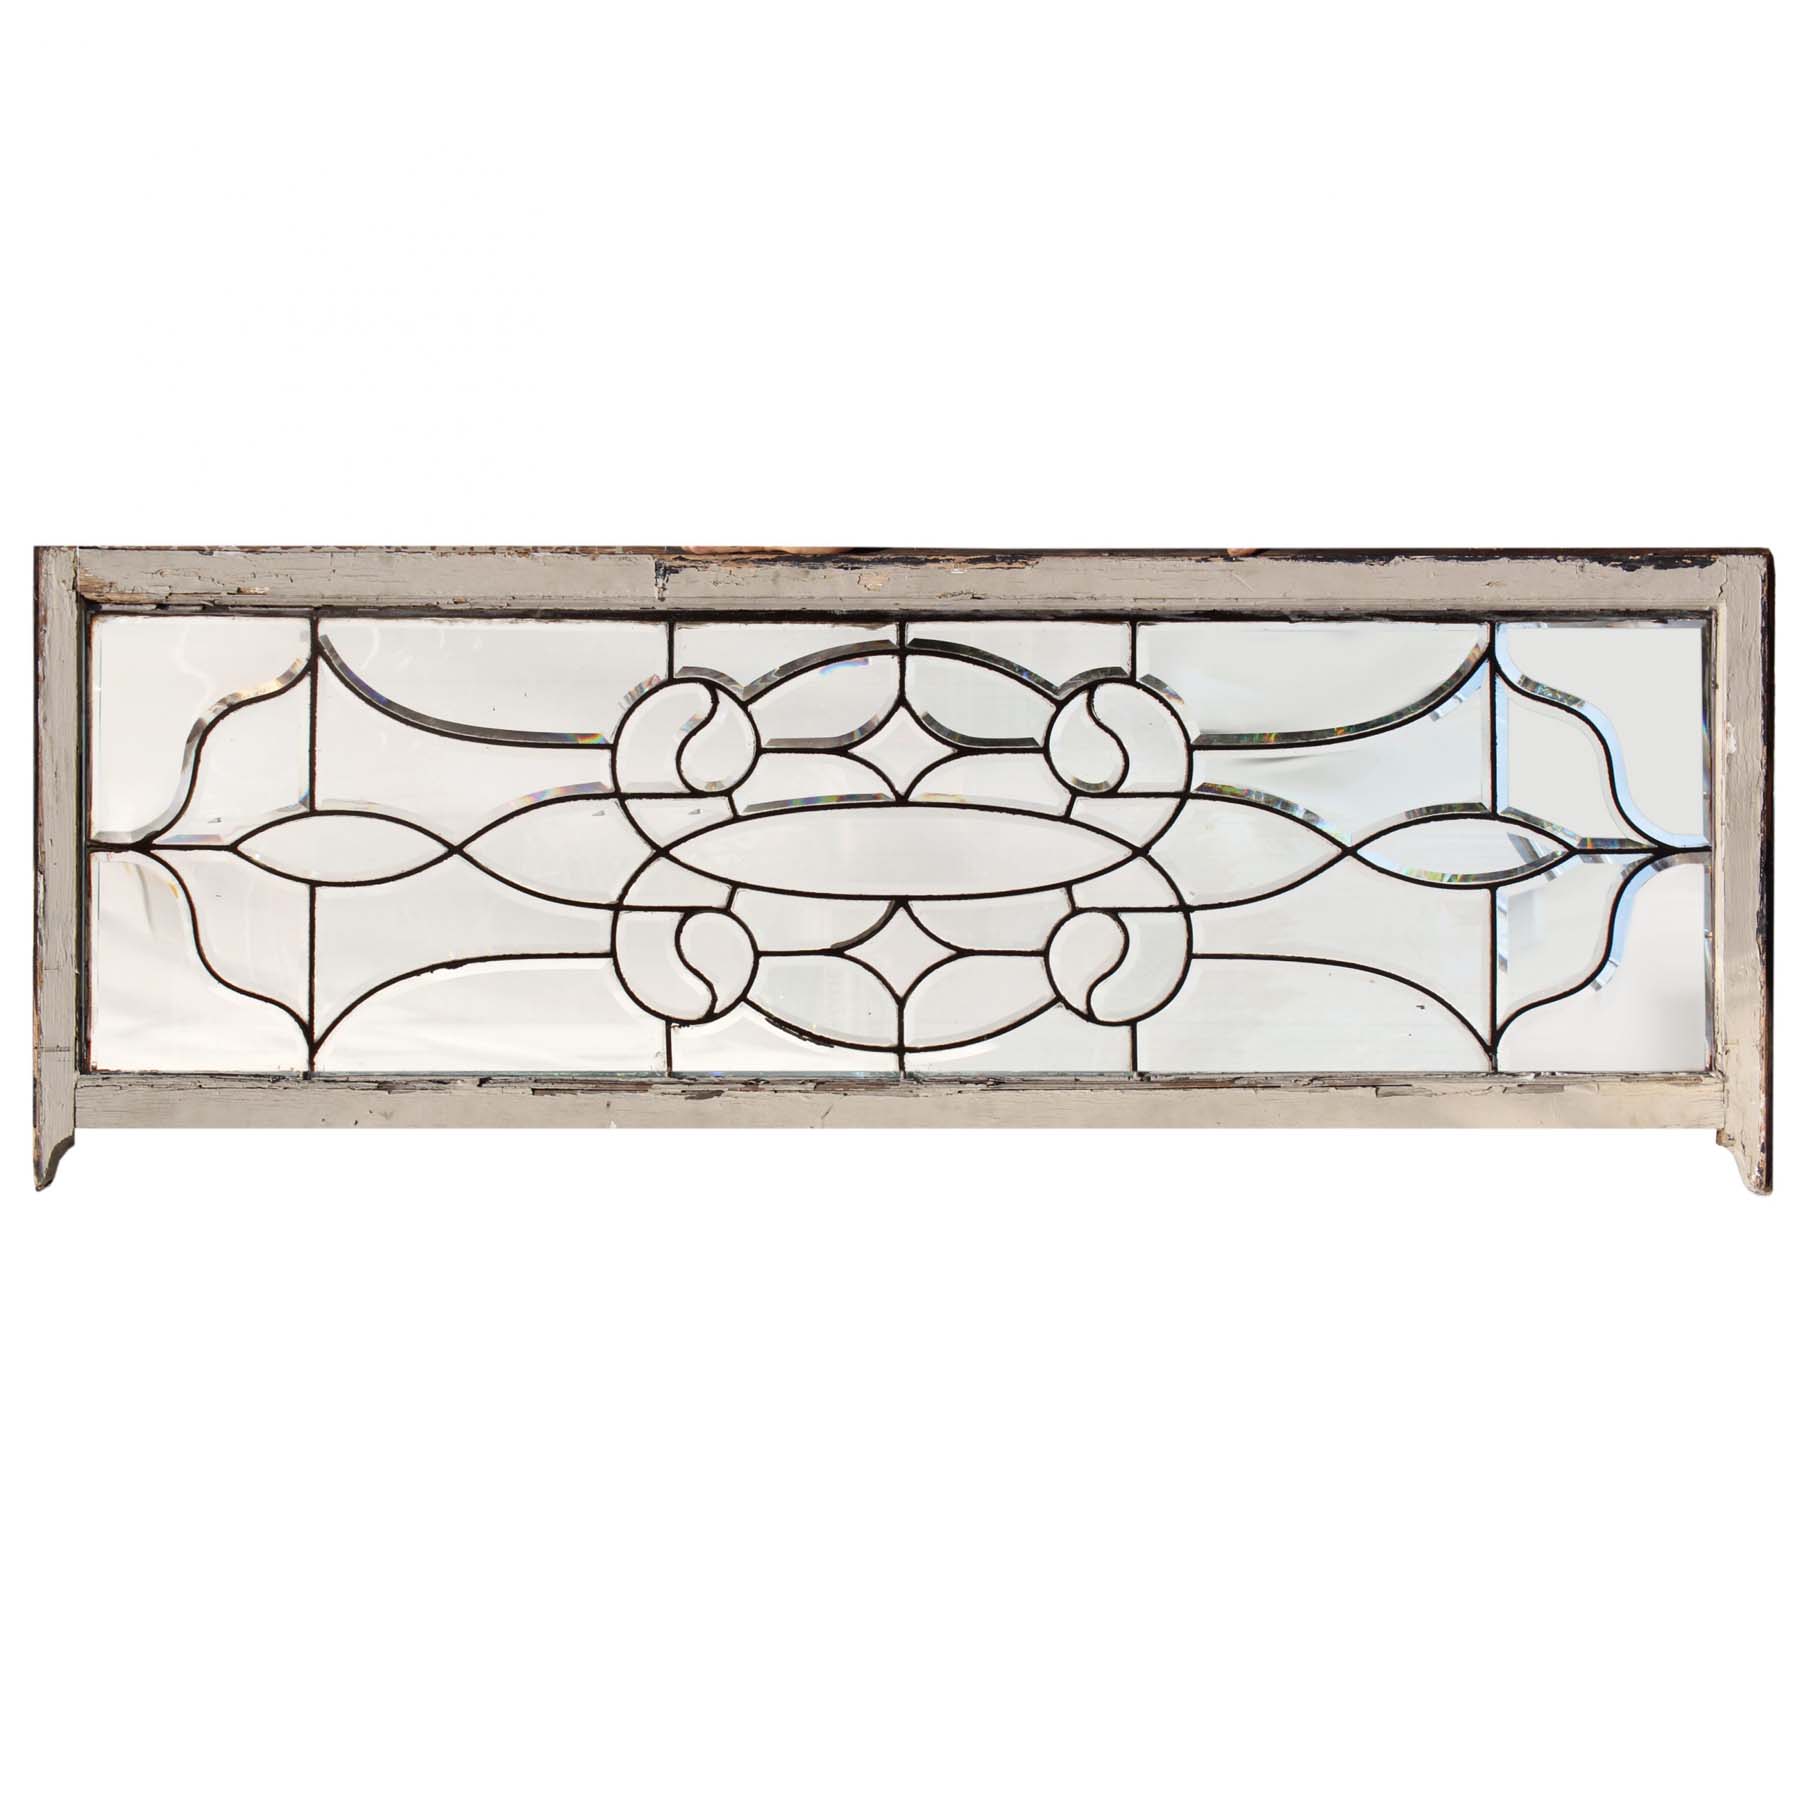 Antique American Leaded & Beveled Glass Transom-0